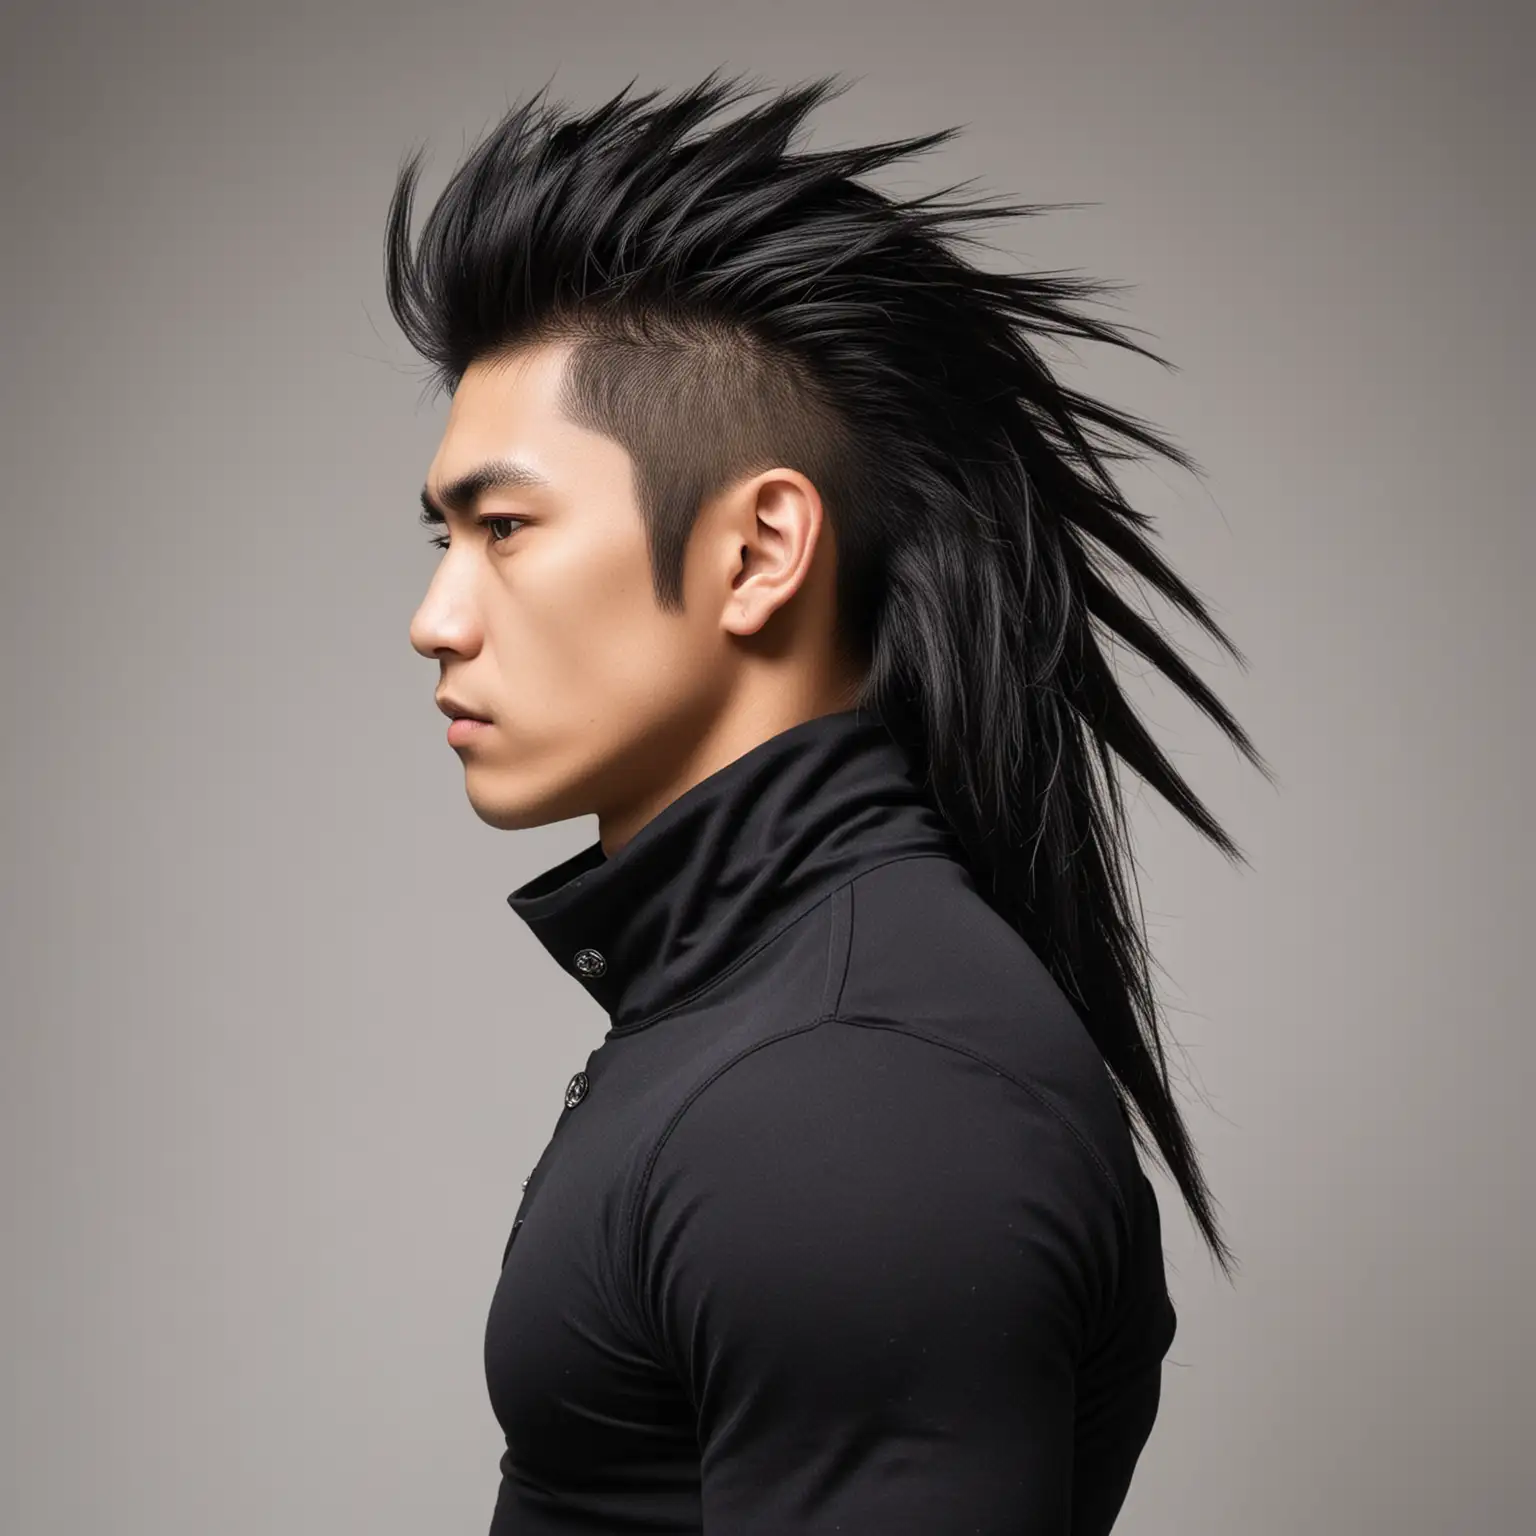 Japanese Male Bodybuilder with Mohawk Hairstyle in Portrait Photography